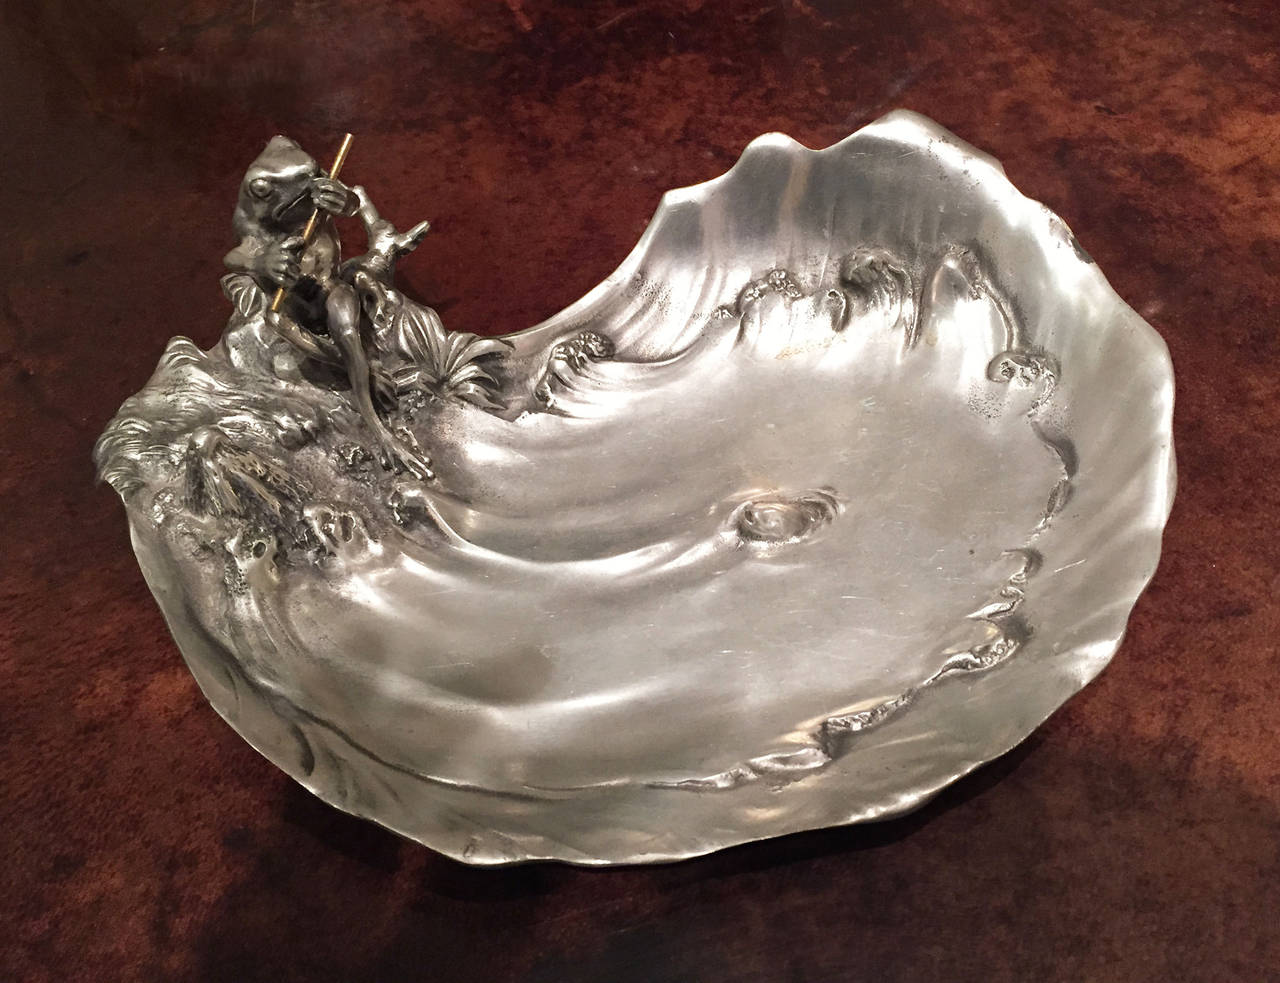 Italian Art Nouveau pewter ashtray in the form of a pond with a frog sitting
on the edge playing a flute. Stamped with hallmarks by Achille Gamba.